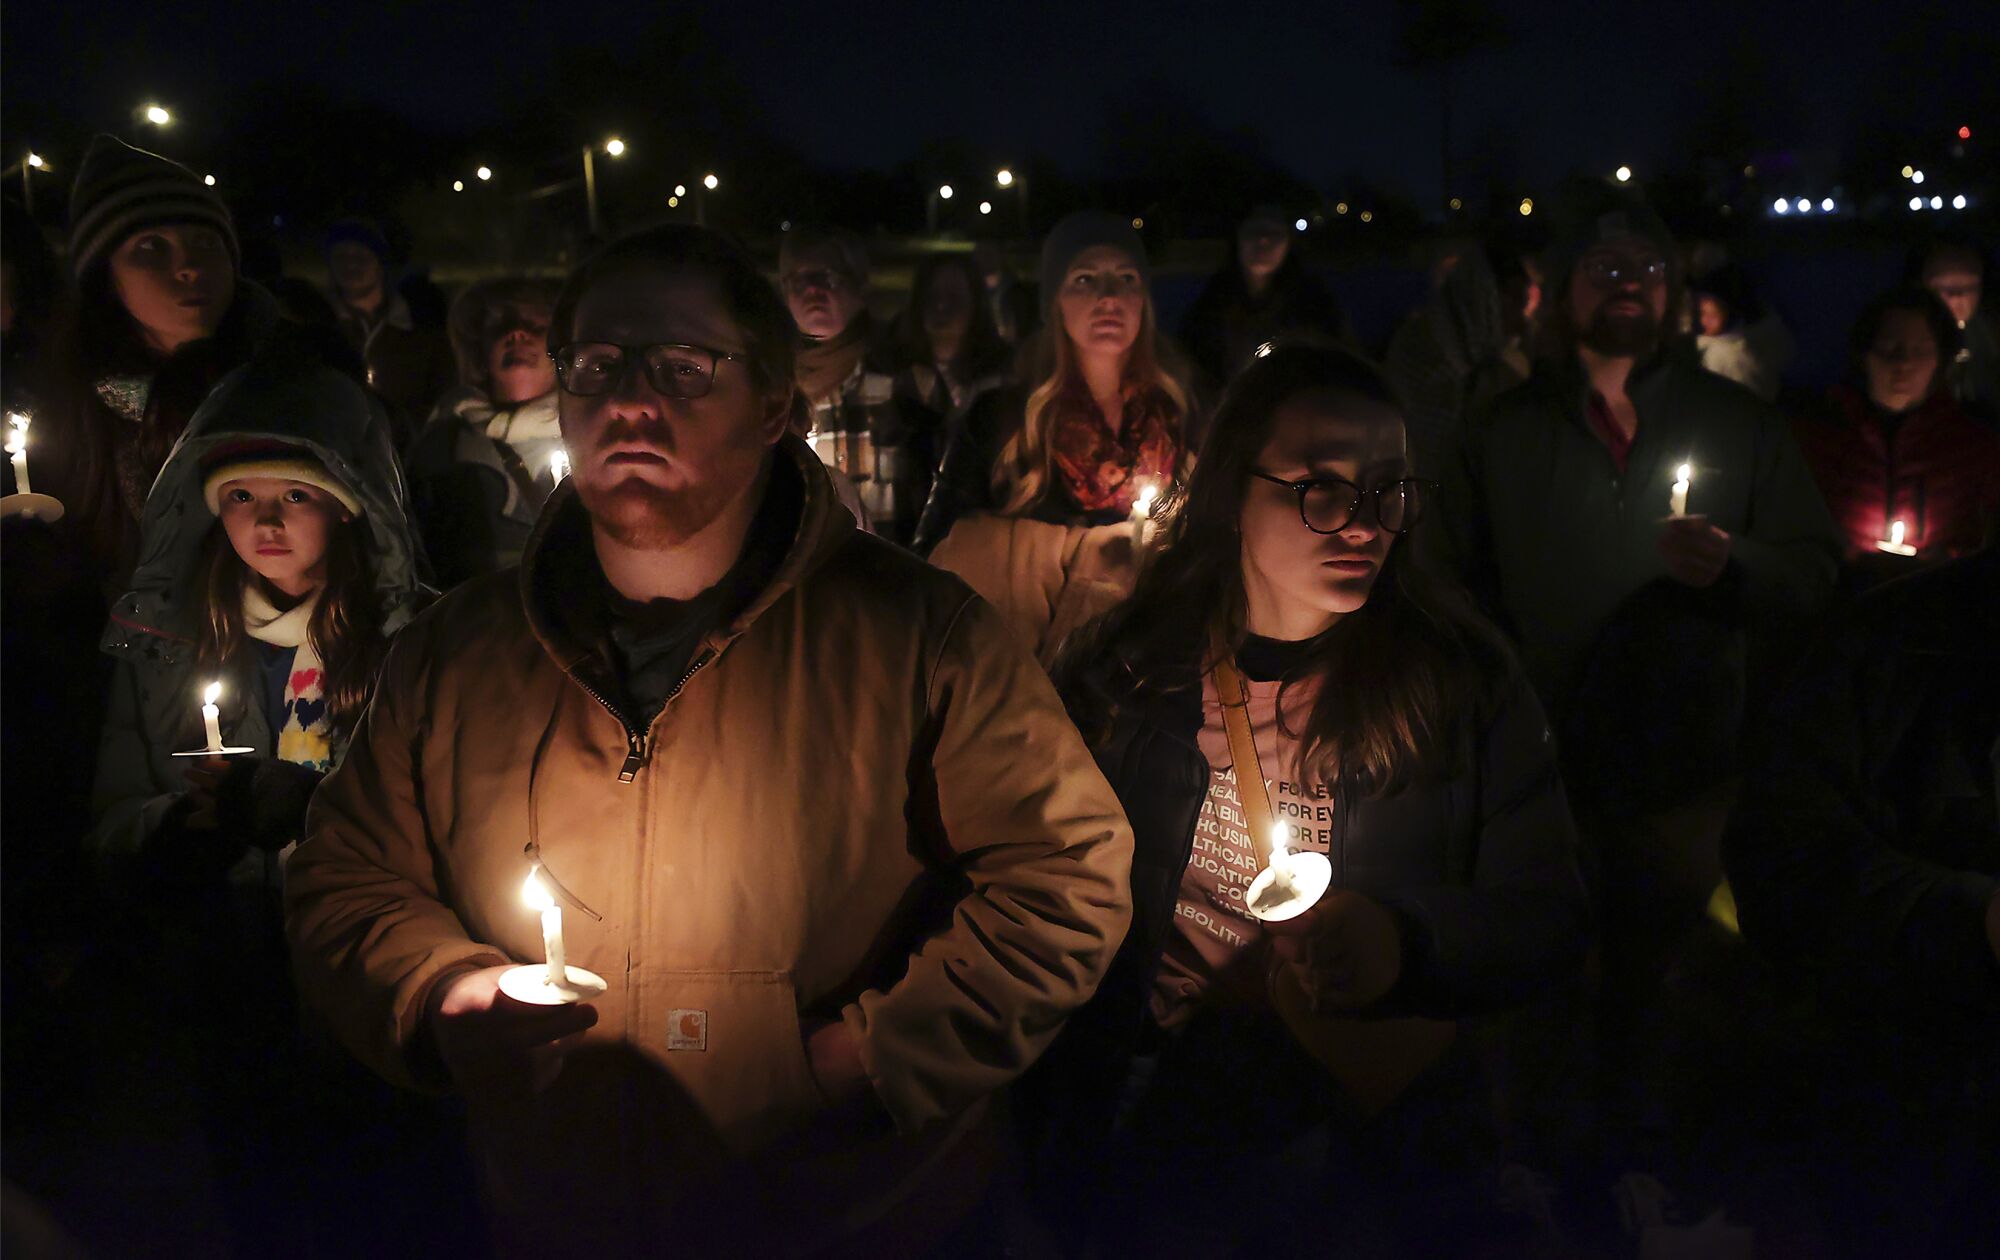 A crowd of somber people holding candles as they stand outside in the dark